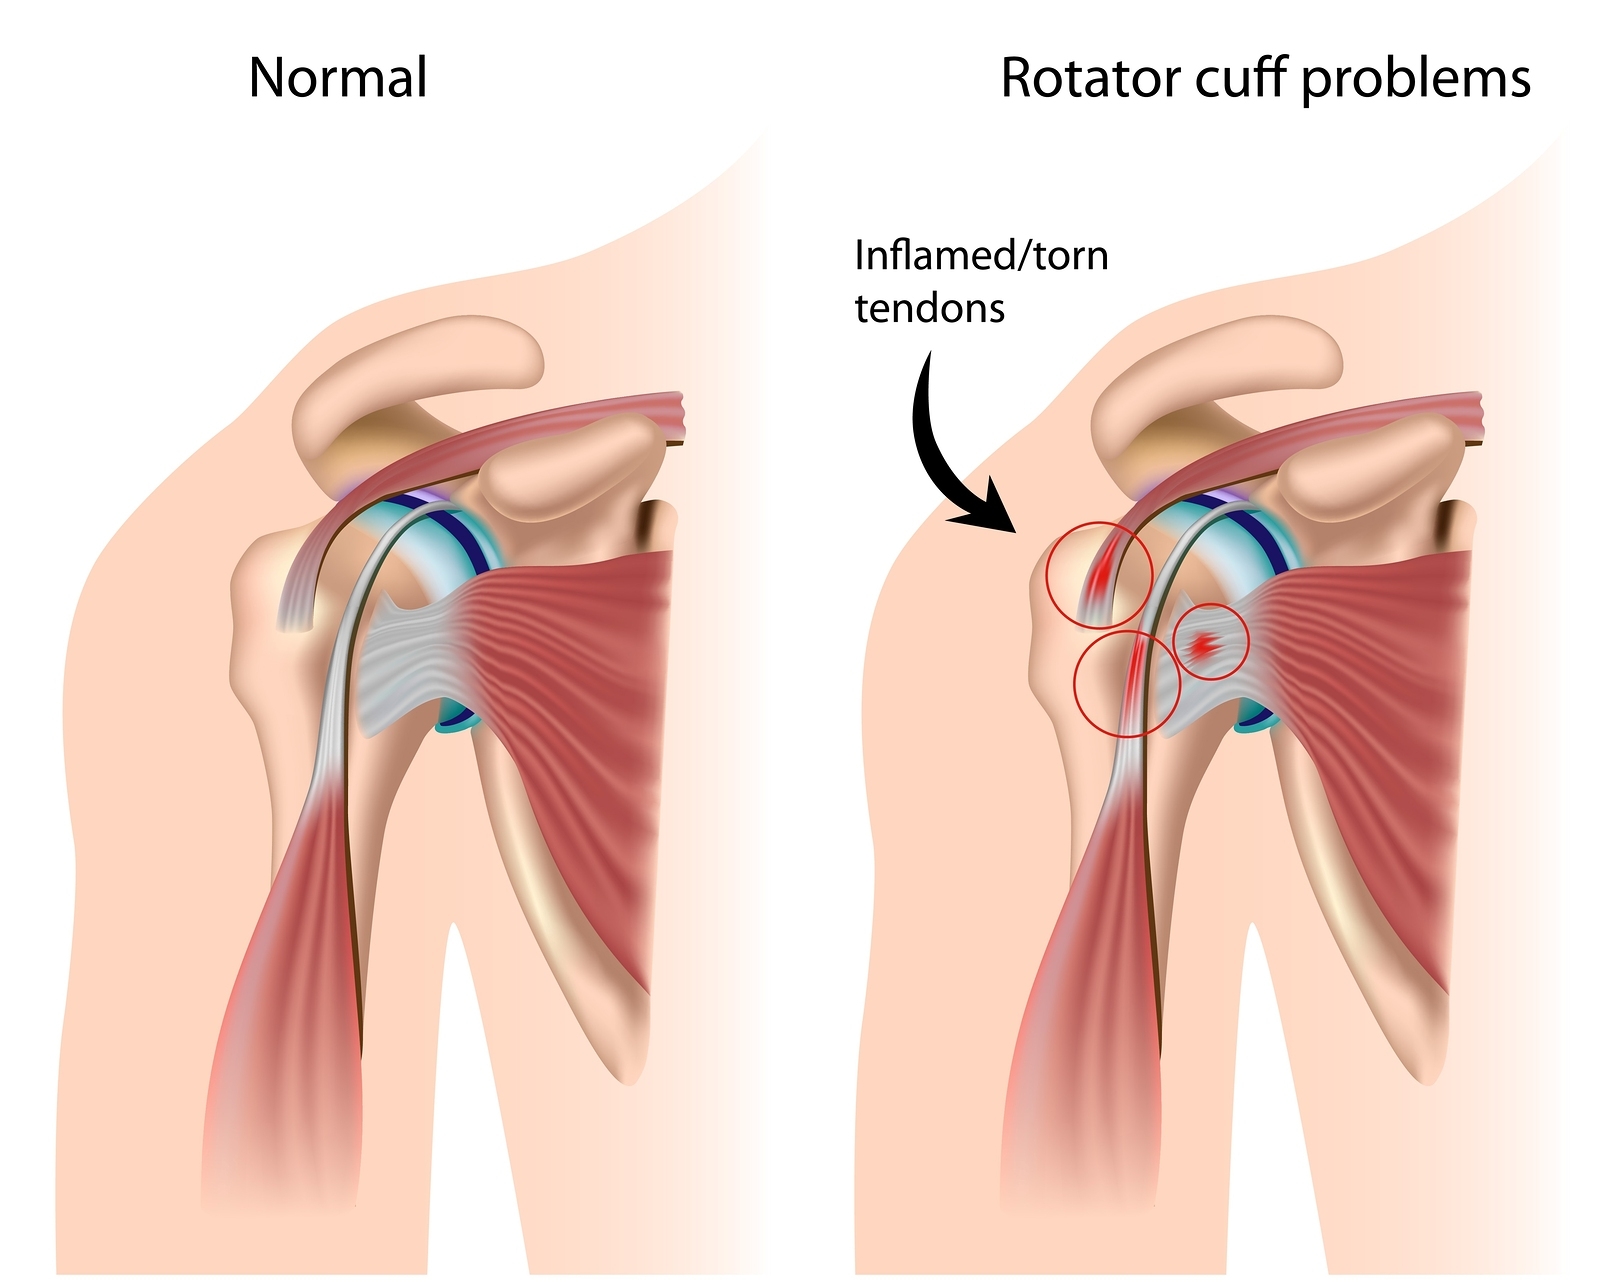 How to Rehabilitate Your Shoulder in 30 Days Without Cortisone Injections – Part II